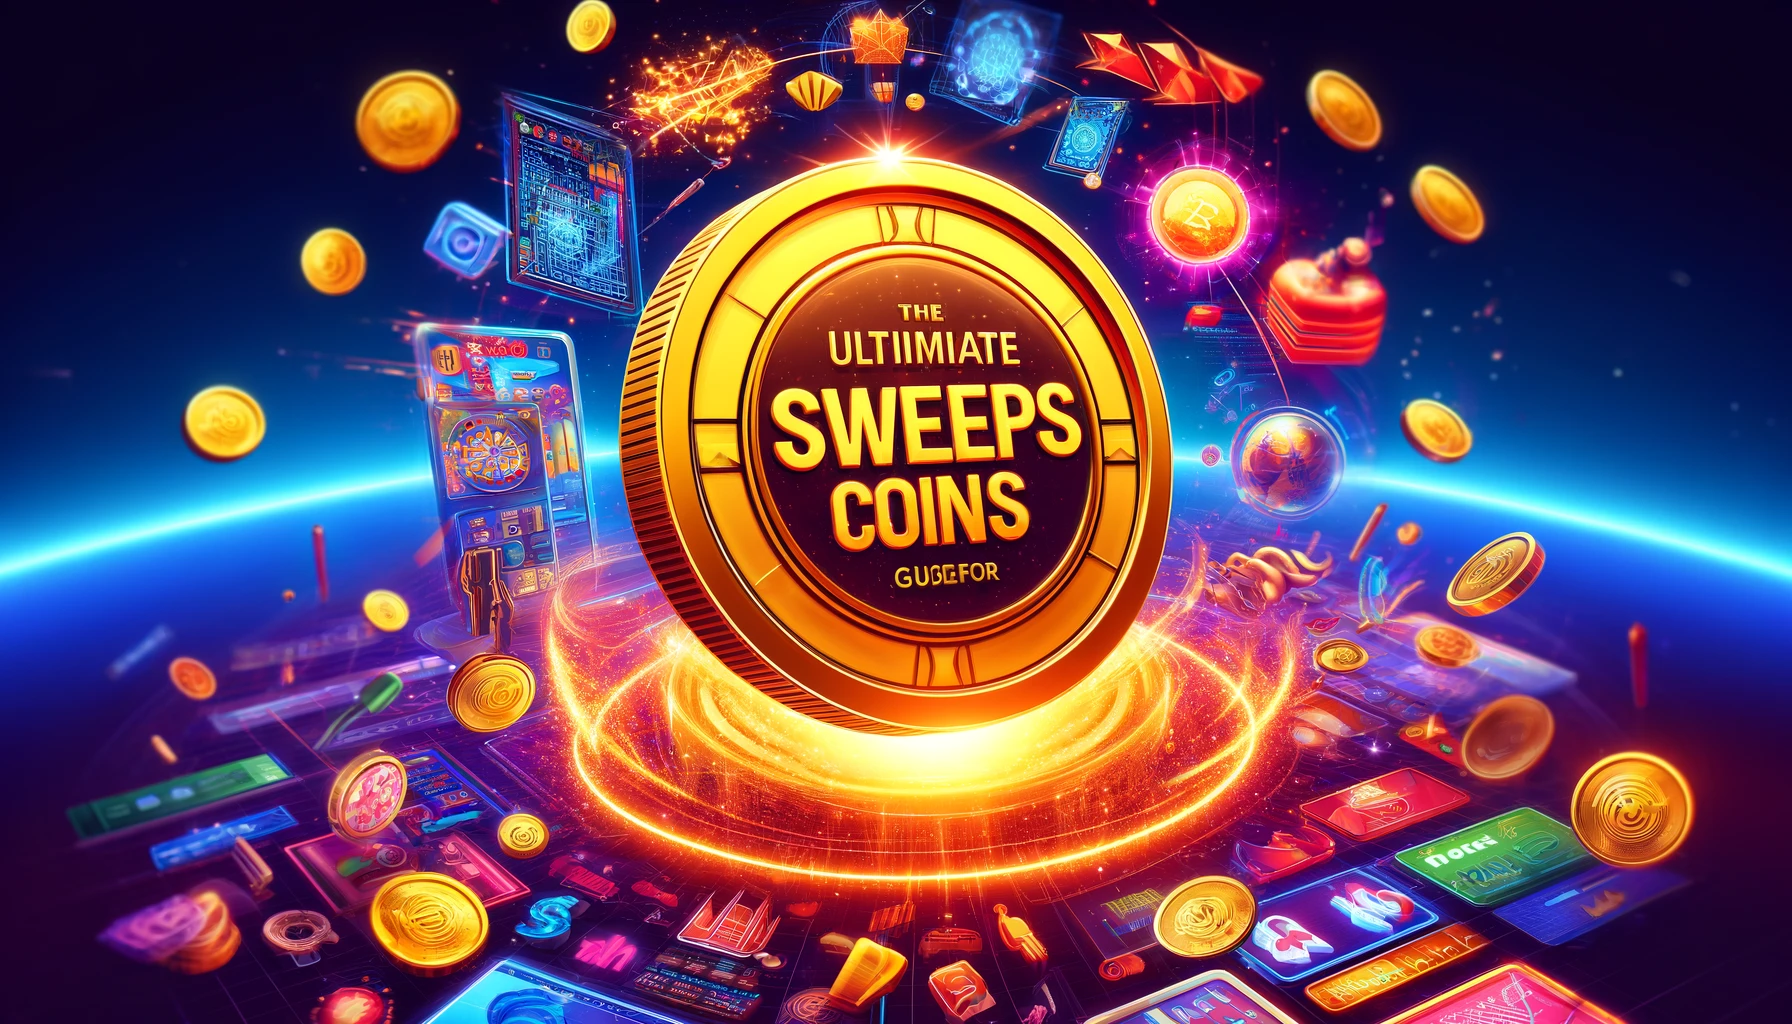 The Ultimate Sweeps Coins Guide: What Are They Used For?